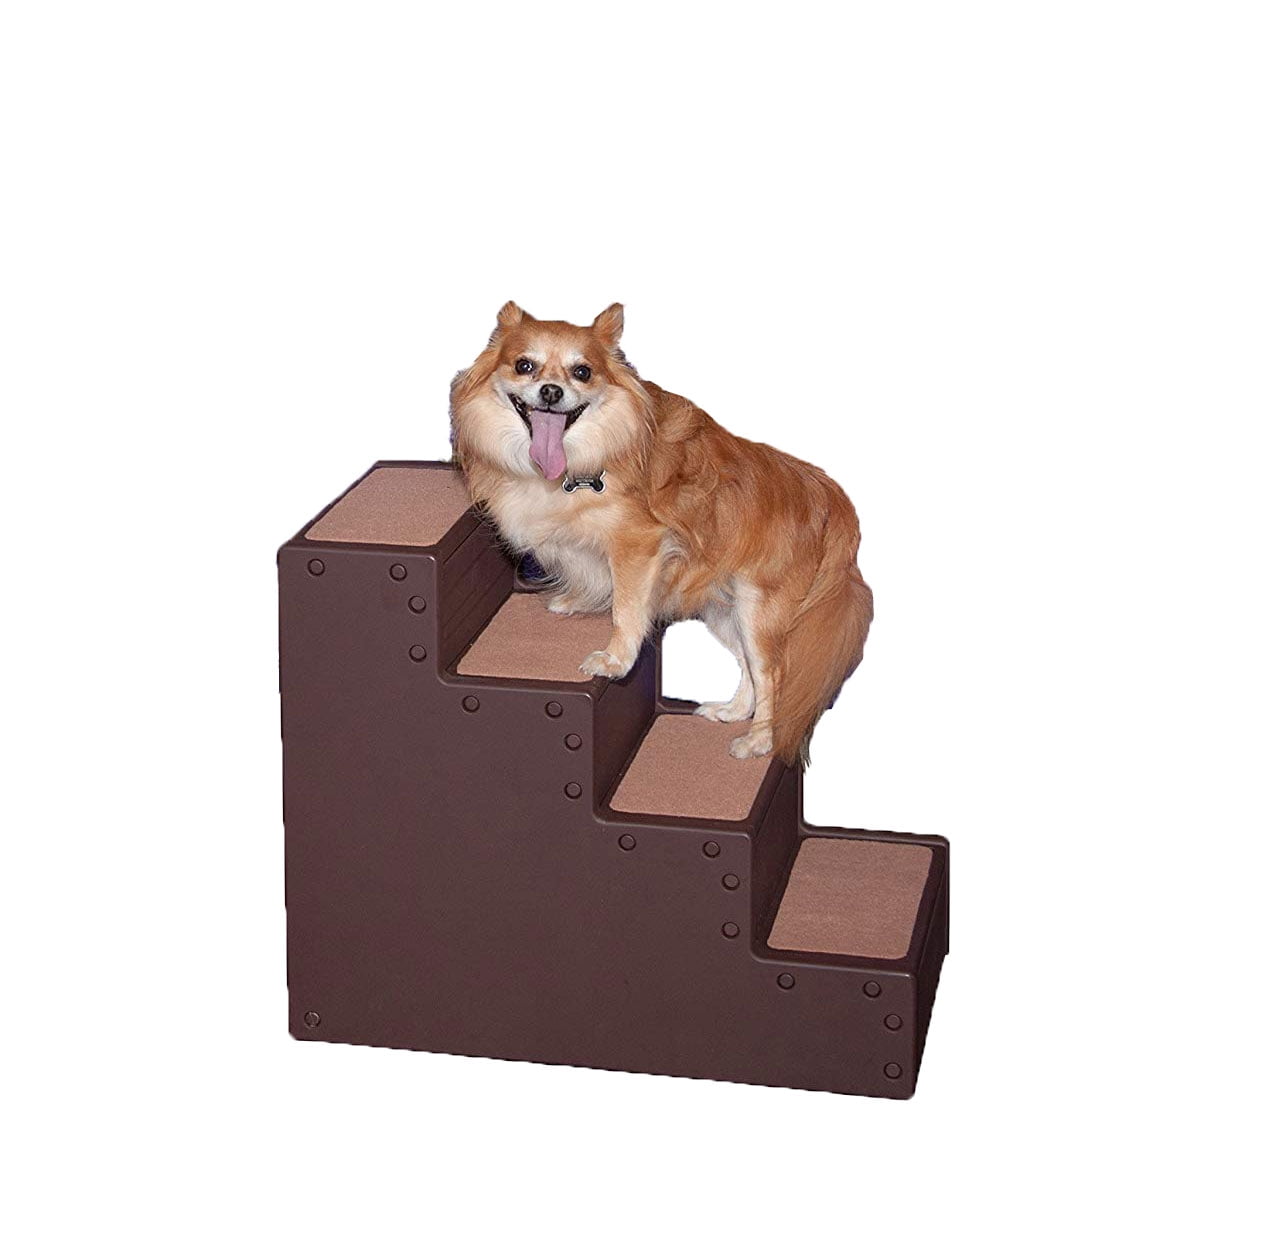 pet stairs for tall beds